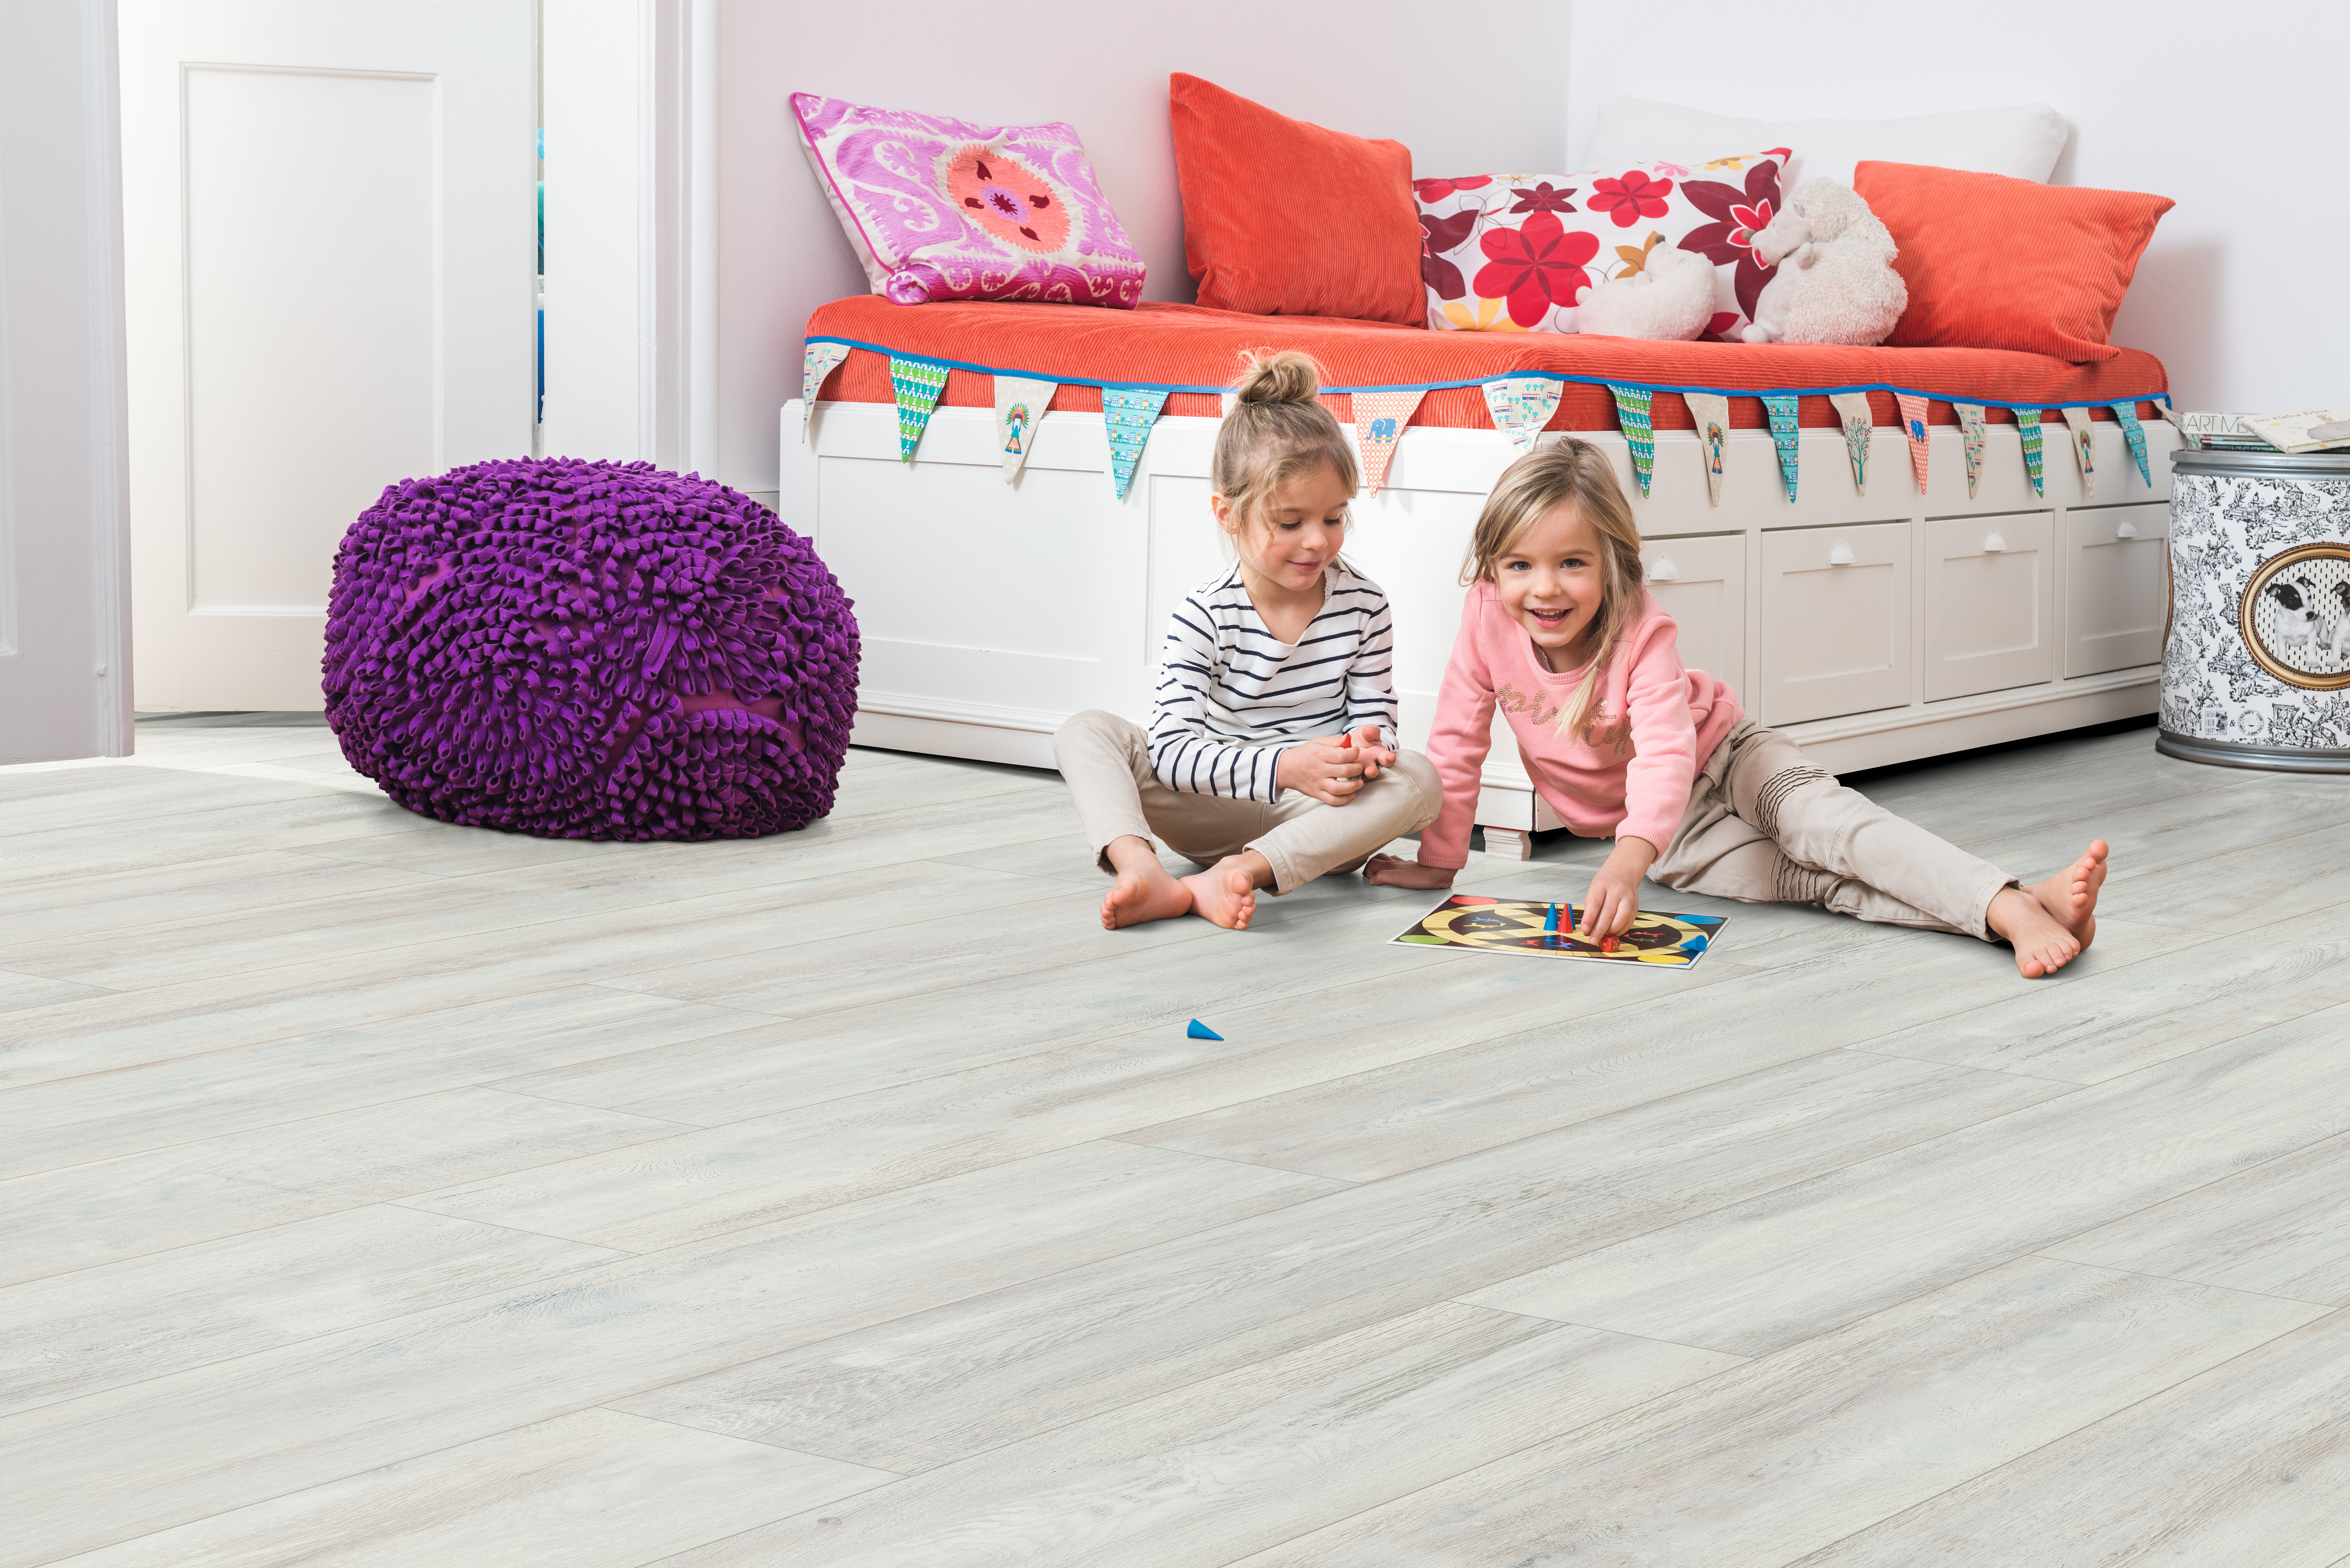 HOME Comfort flooring - For all those who want to install cork flooring themselves